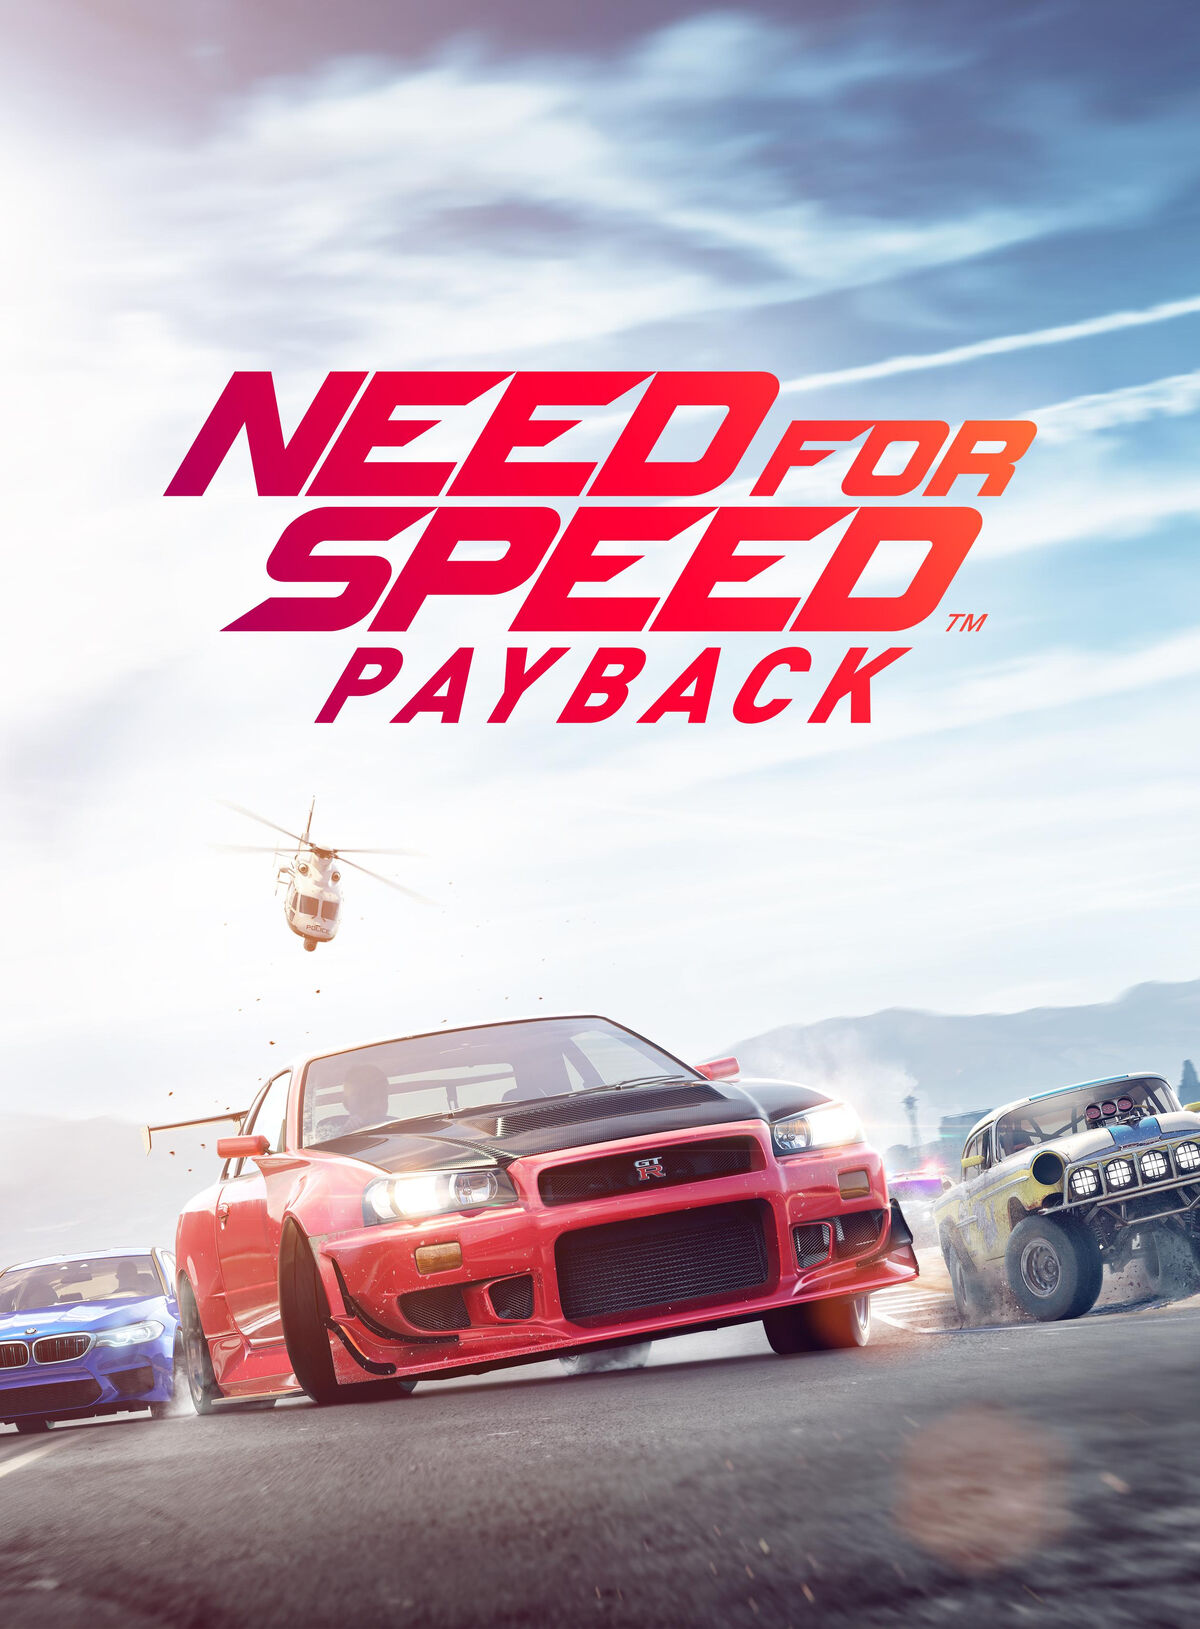 Need for speed playback. NFS Payback 2017 Постер. Need for Speed Payback пс4. Need for Speed Payback ps4 диск. NFS Payback ps4 обложка.